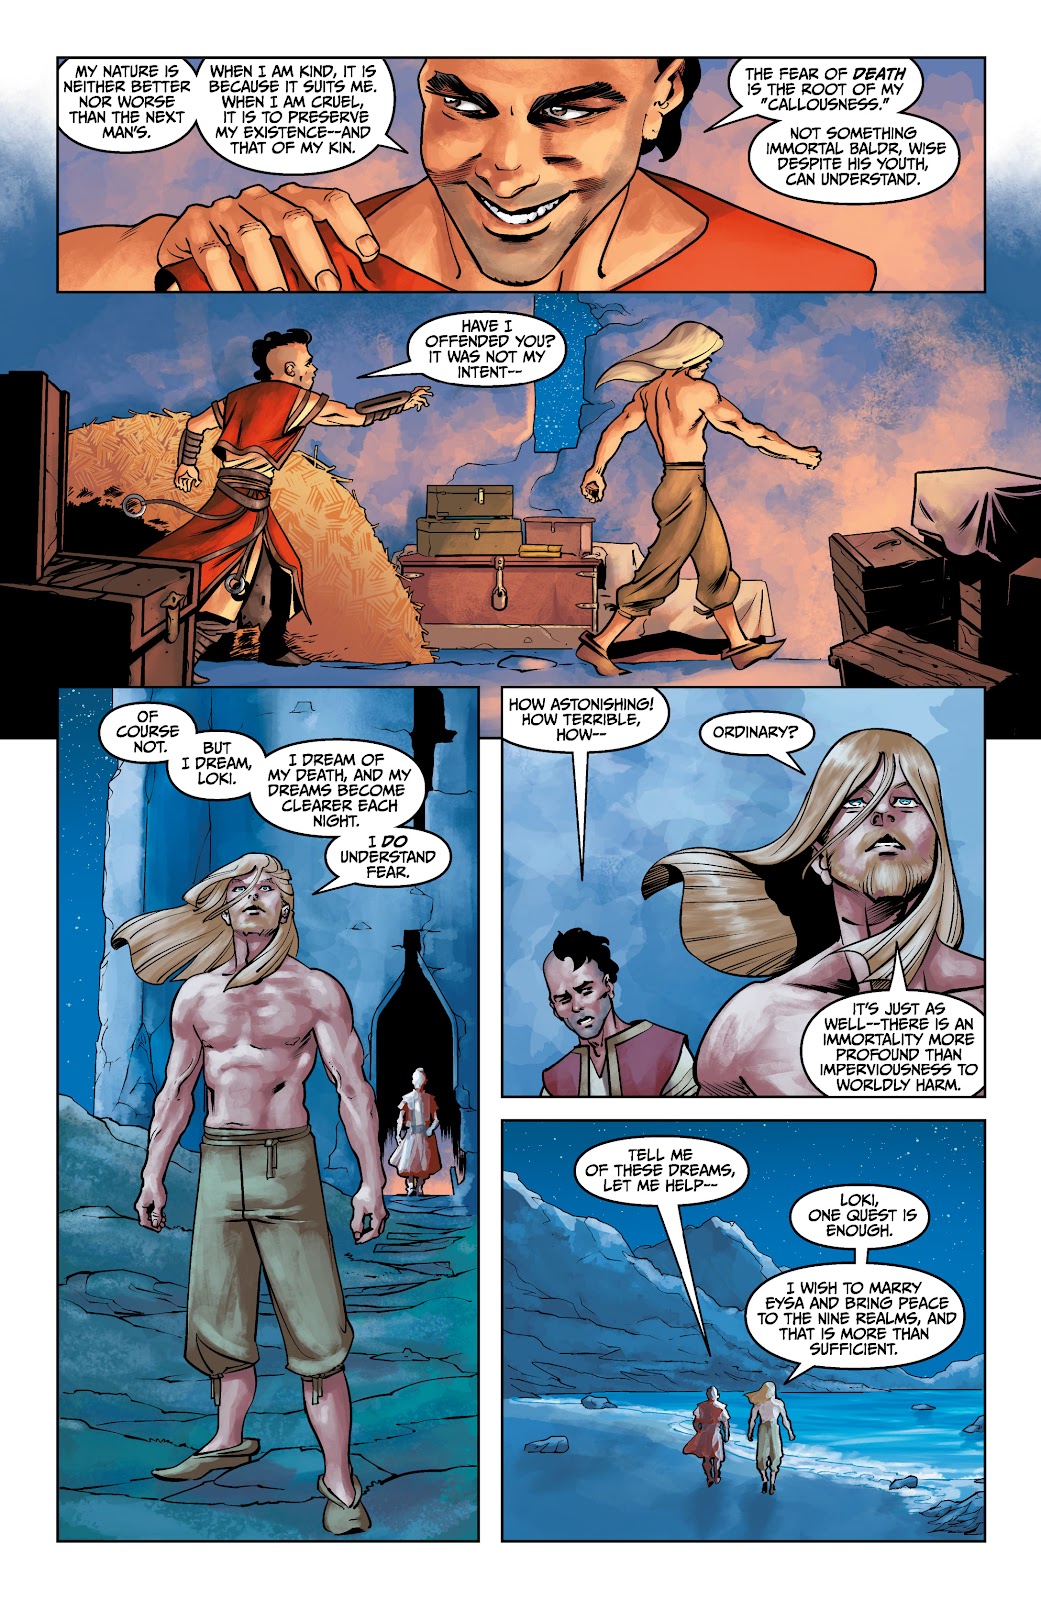 Assassin's Creed Valhalla: Forgotten Myths issue 2 - Page 8